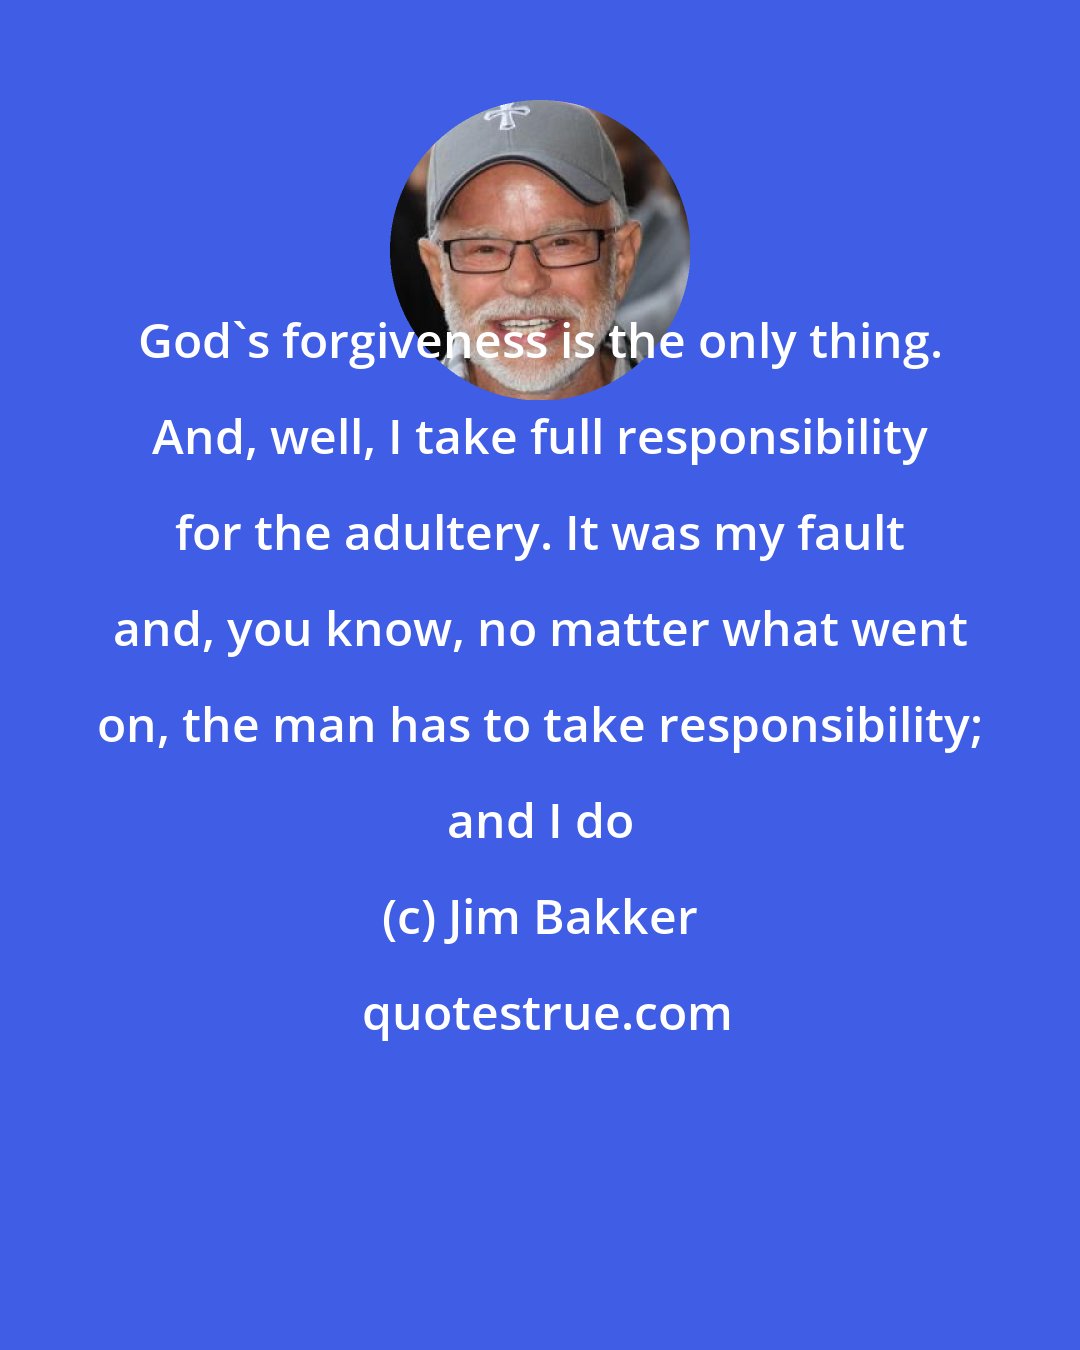 Jim Bakker: God's forgiveness is the only thing. And, well, I take full responsibility for the adultery. It was my fault and, you know, no matter what went on, the man has to take responsibility; and I do